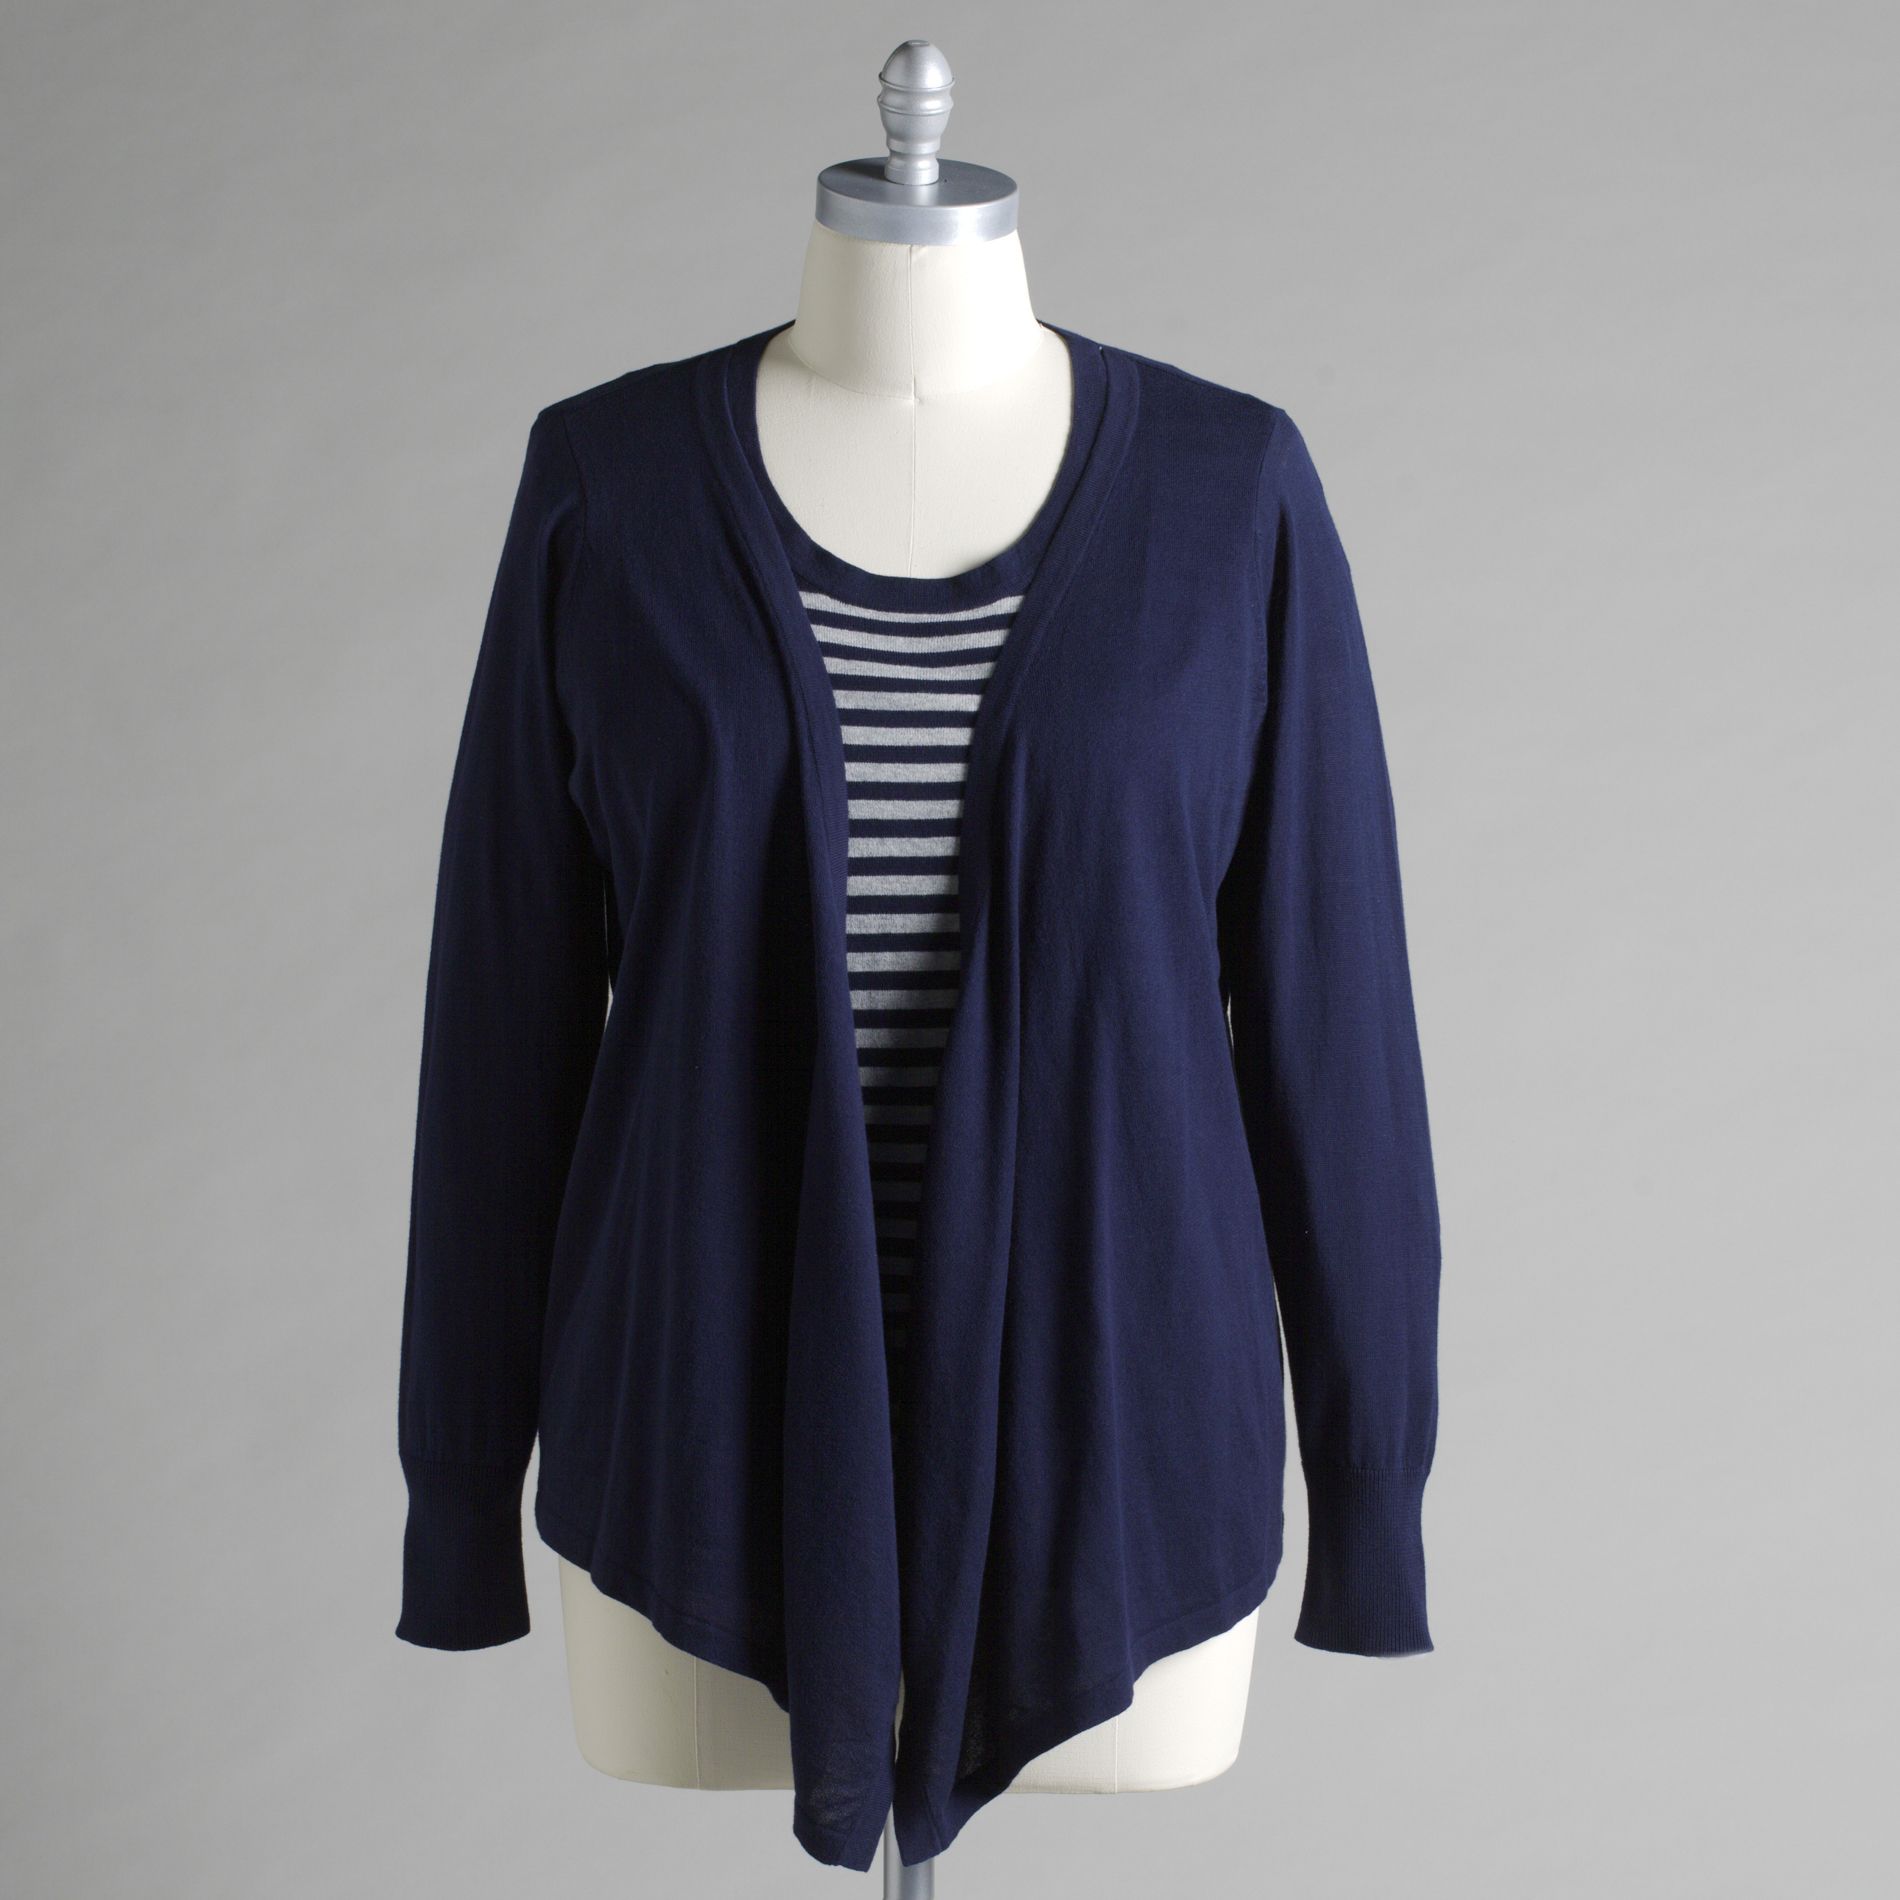 Basic Editions Women's Plus Sweater with Sewn-On Cardigan